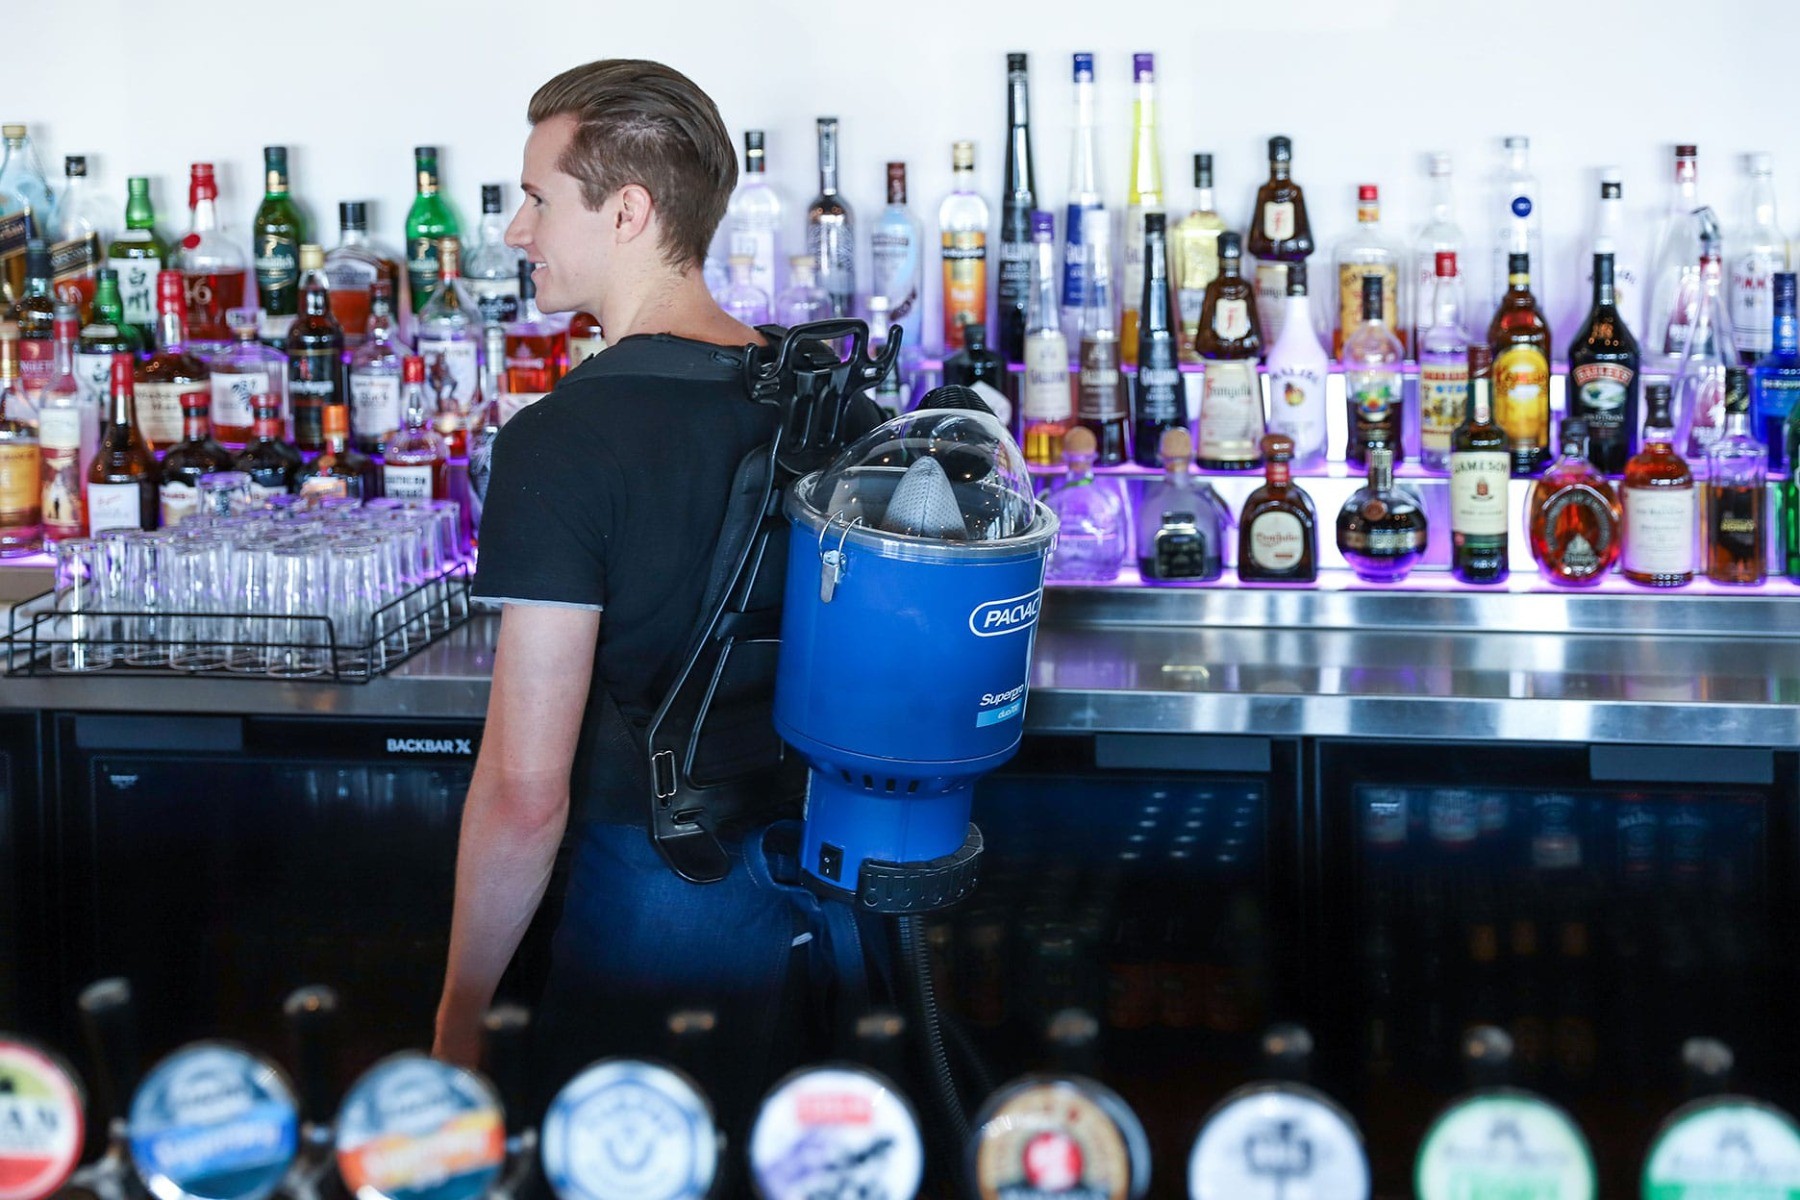 Male in a bar with lots of liquor and glassware using a water-proof backpack vacuum.